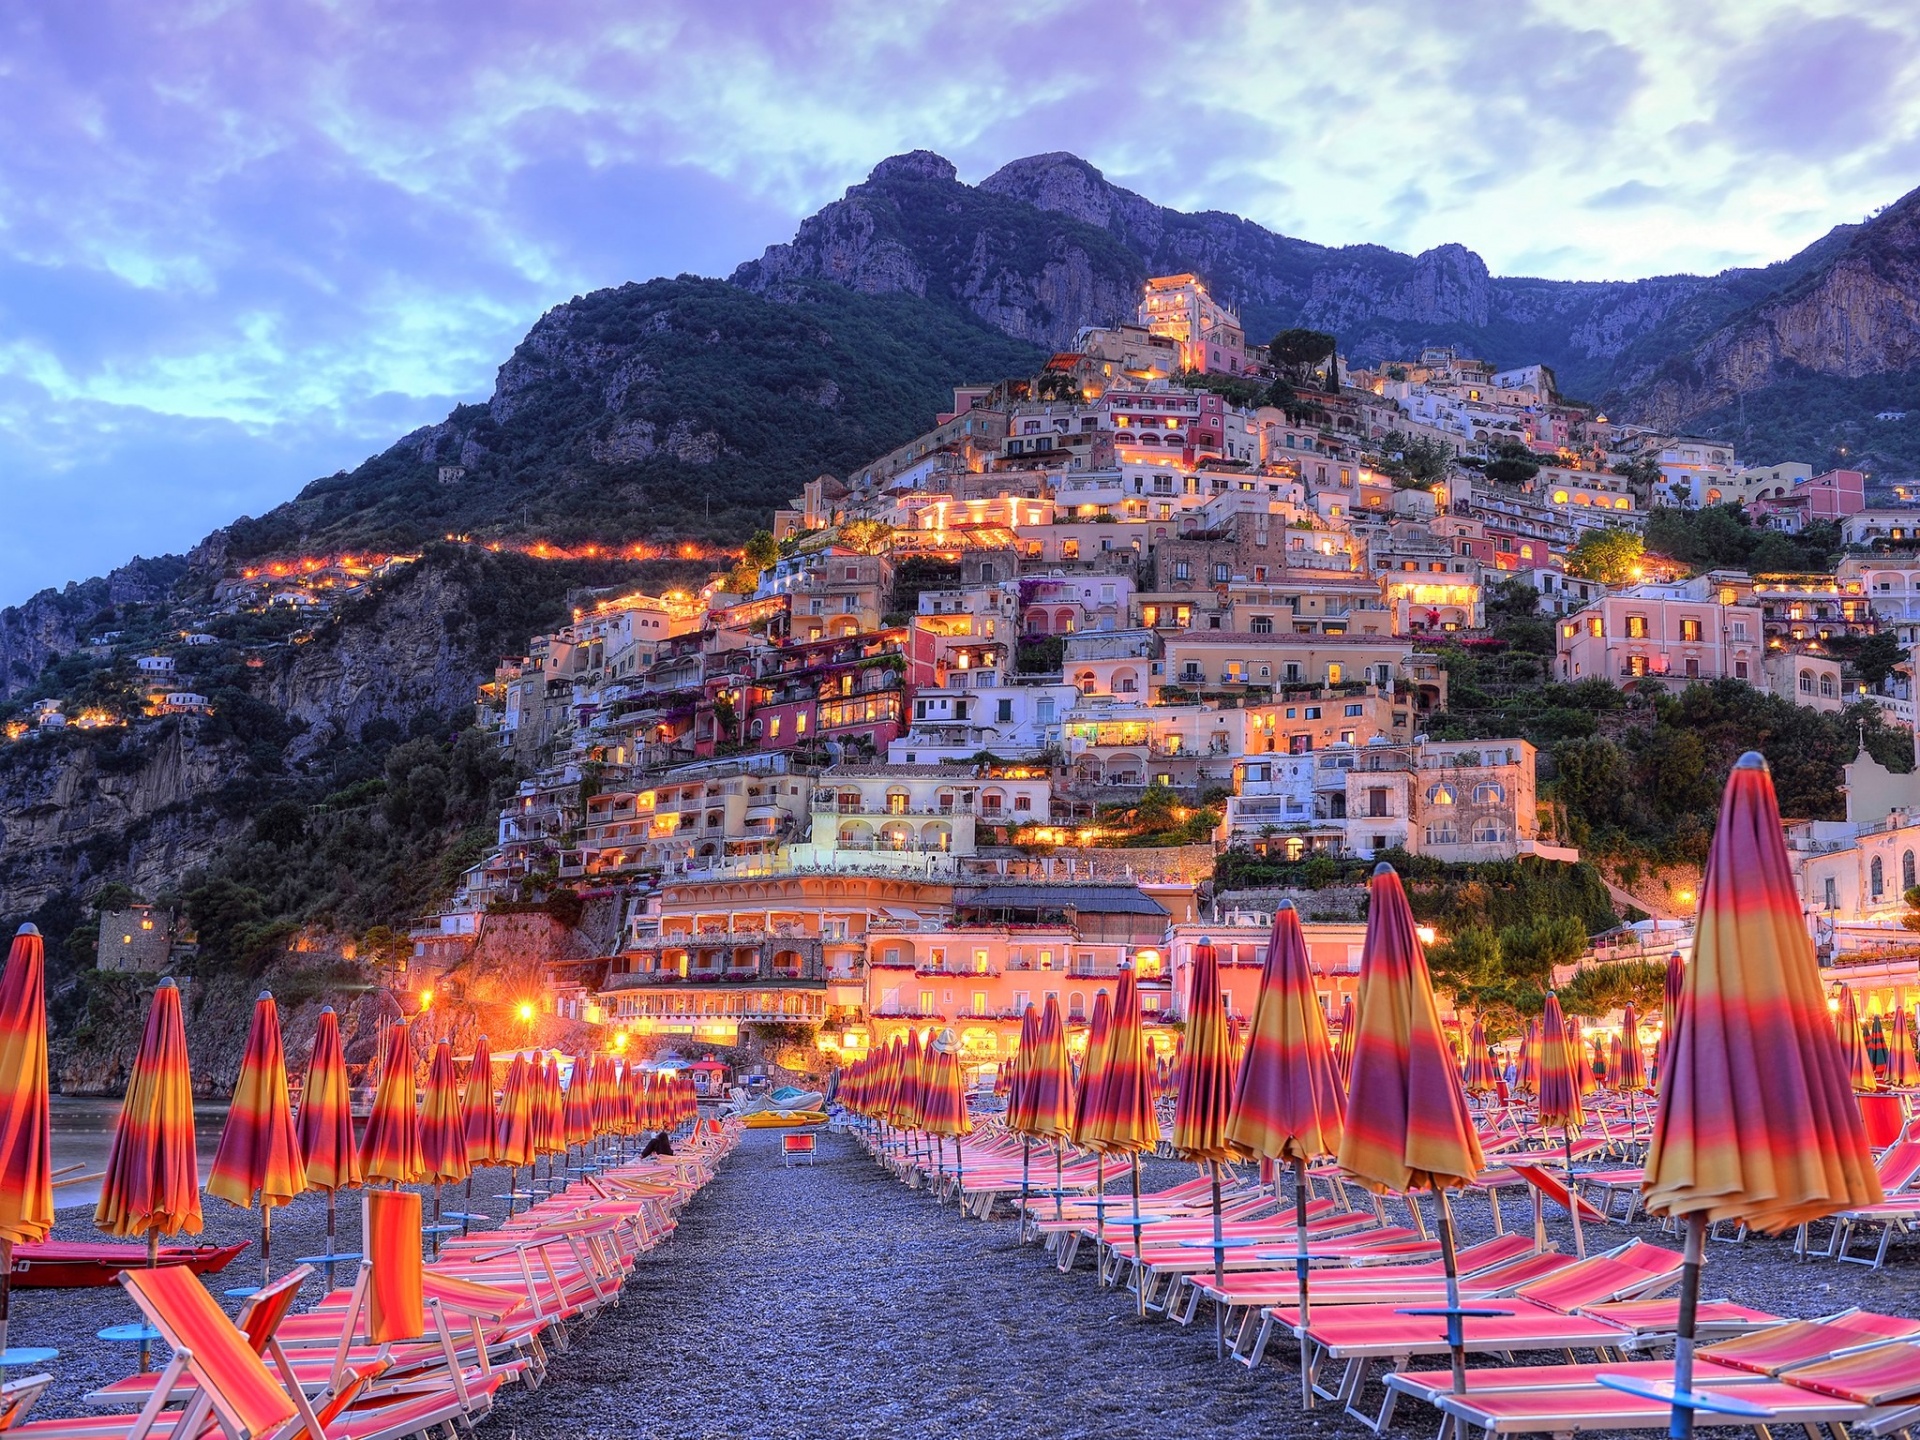 15 PHOTOS OF THE AMALFI COAST THAT WILL SPARK YOUR WANDERLUST Stay in